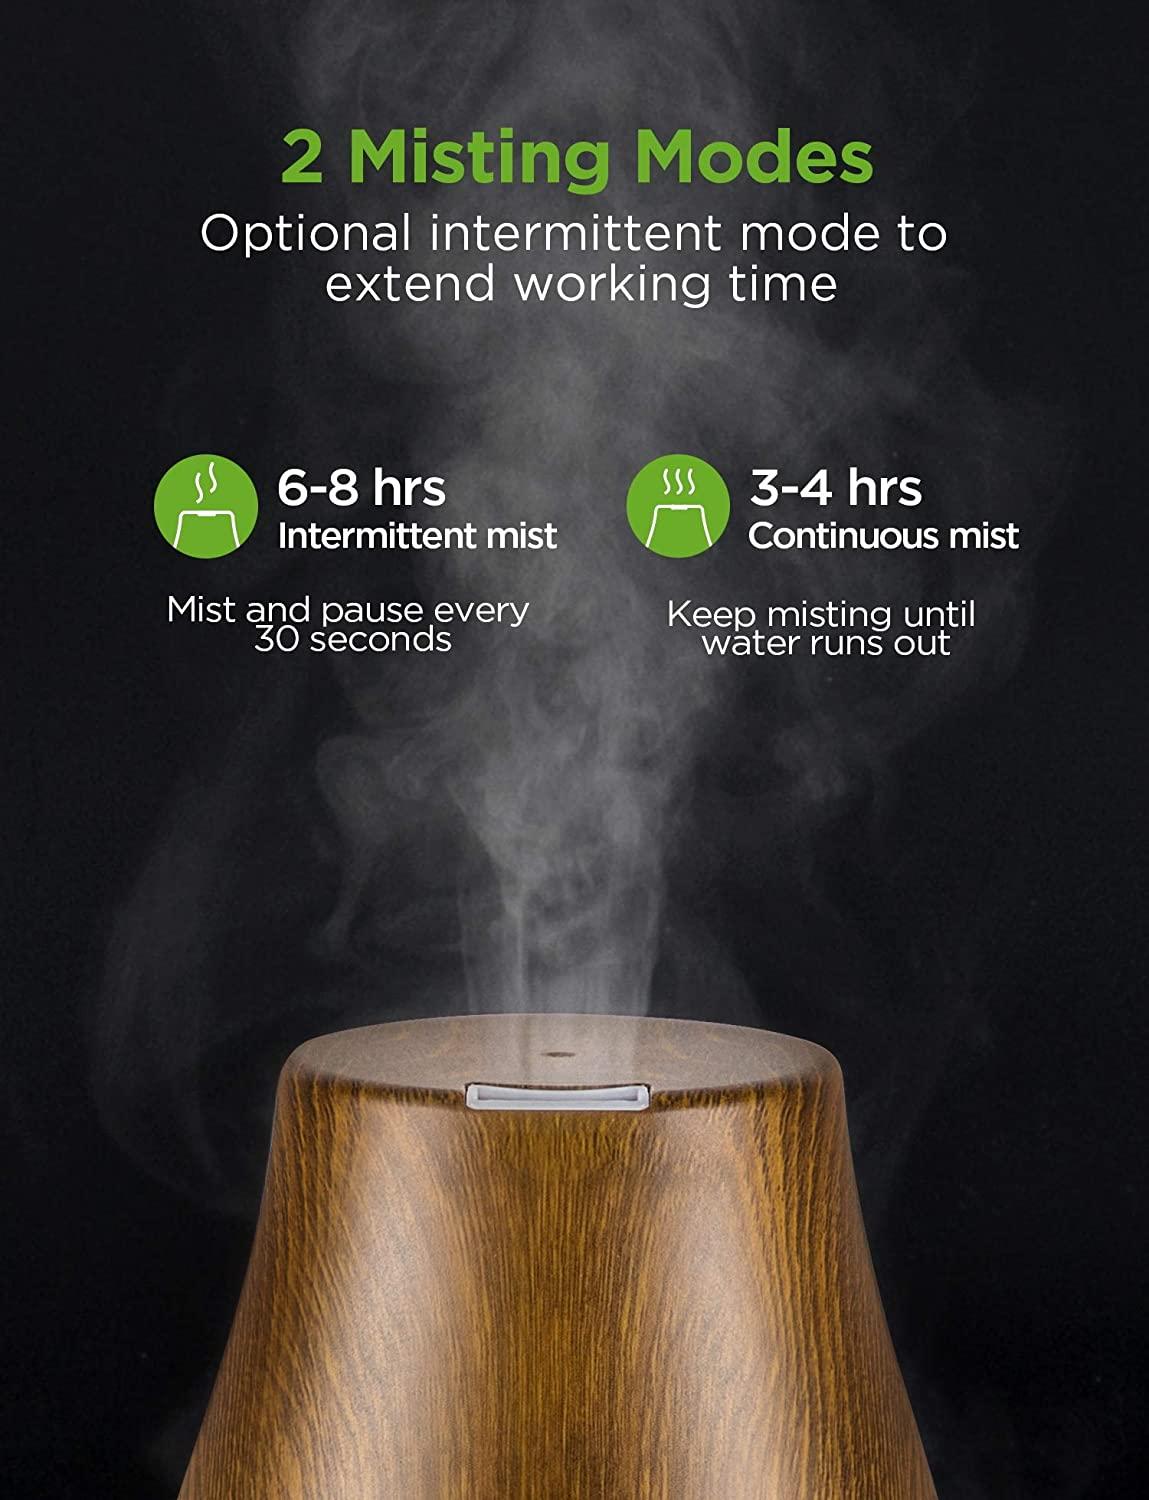 InnoGear Essential Oil Diffuser, 150ML Ceramic Diffuser for Home  Handcrafted Aromatherapy Diffuser Ultrasonic Cool Mist Humidifier with 2  Mist Modes